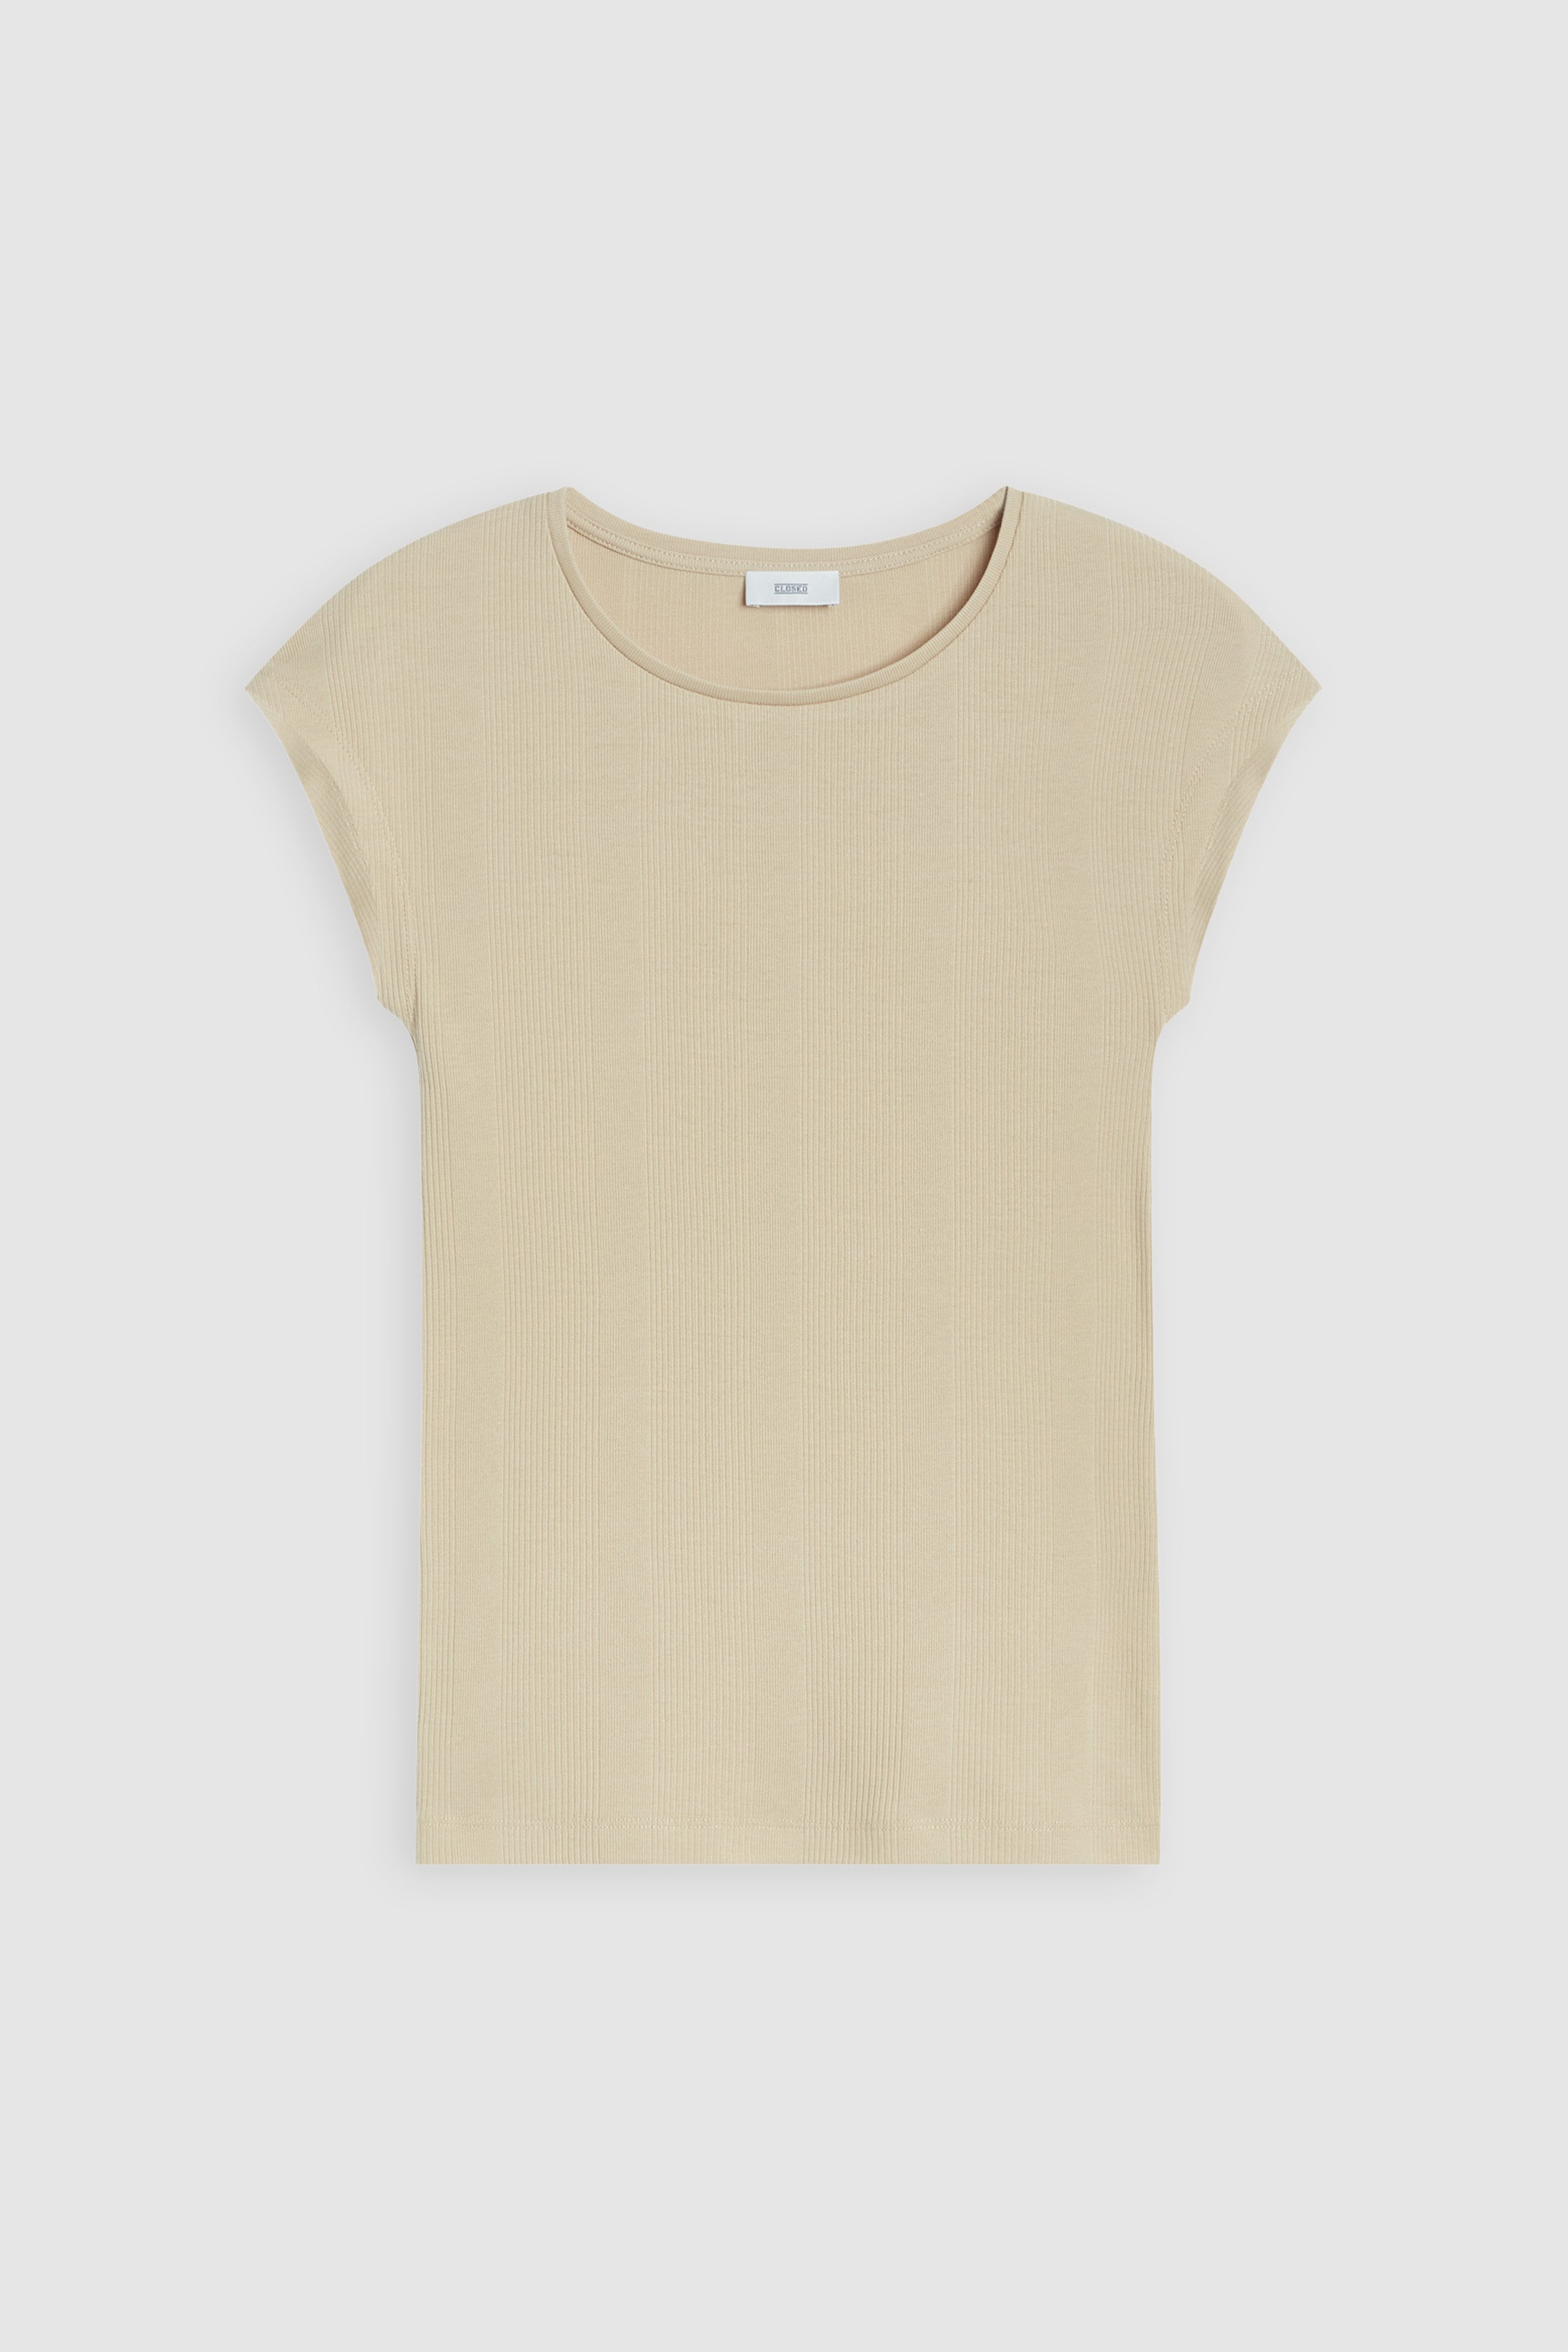 CLOSED-CAP SLEEVE TOP-Shirts-Outlet-Sale